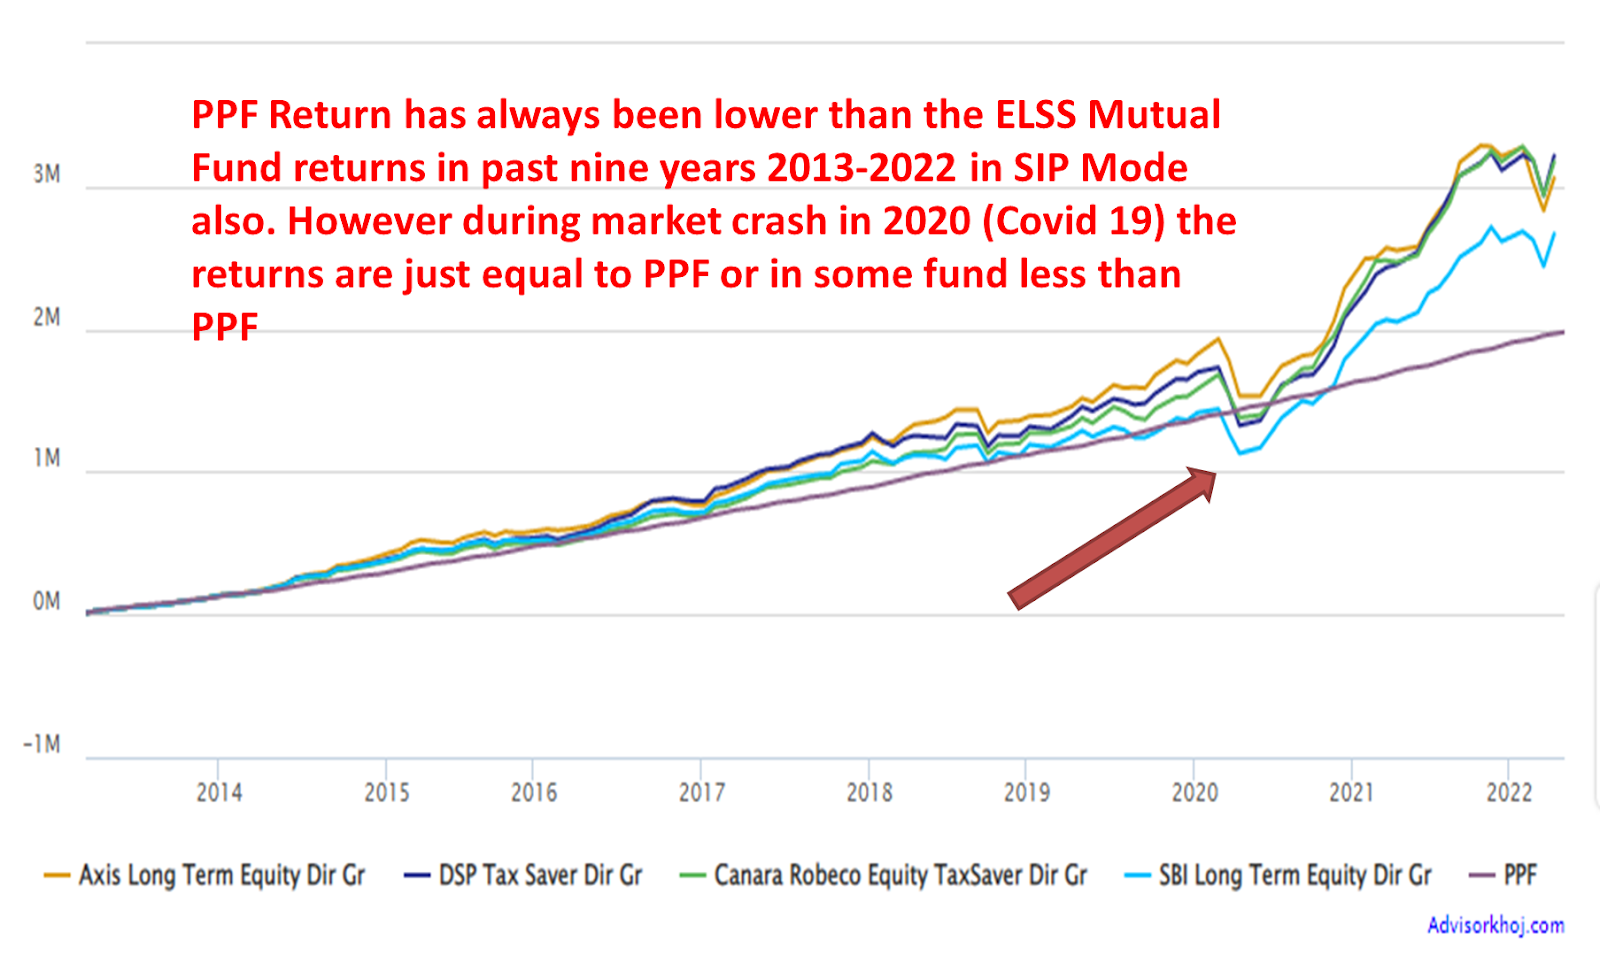 This image compares the performance of four ELSS funds Vs PPF in SIP investment mode for the period 2013-2022